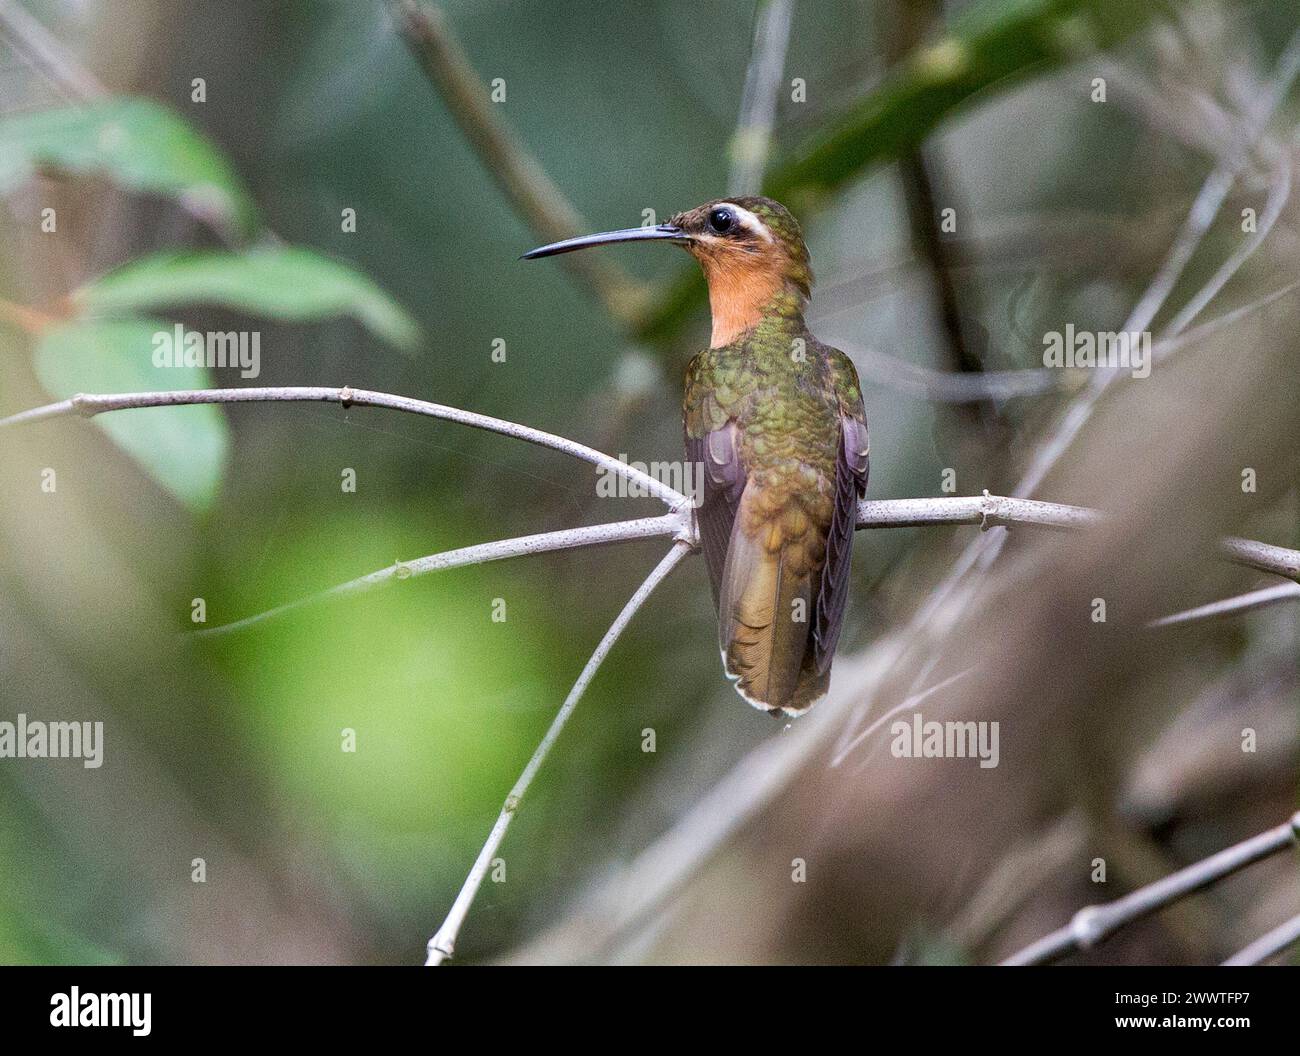 hook-billed hermit (Ramphodon dohrnii, Glaucis dohrnii), adult perched on a thin branch in Atlantic Forest in Brazil - Vulnerable species, Brazil Stock Photo